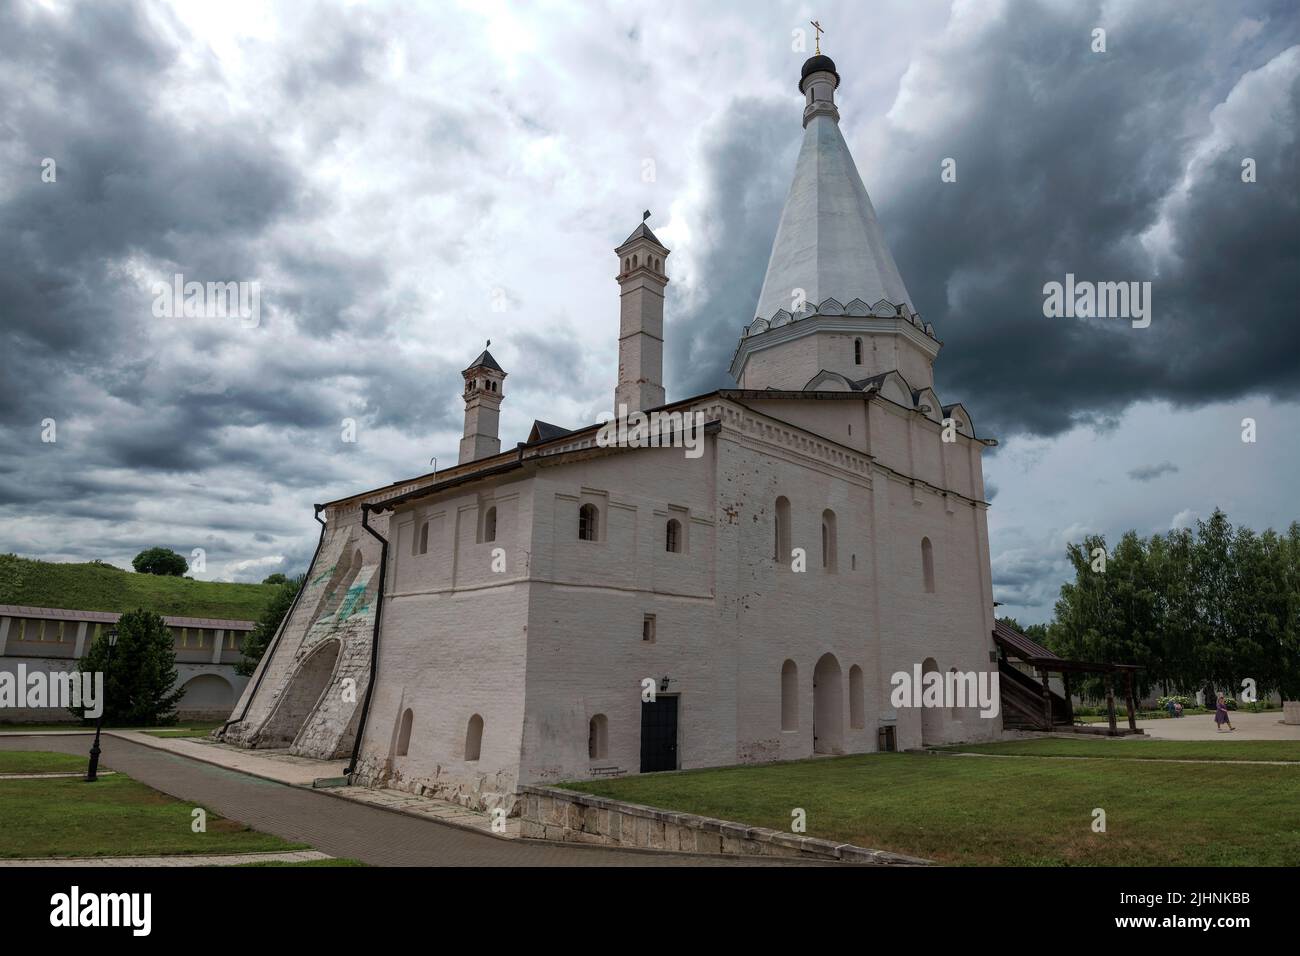 Ancient Church of the Presentation of the Most Holy Theotokos into the Temple under a stormy sky on a July day. Staritsa Assumption Monastery. Tver re Stock Photo